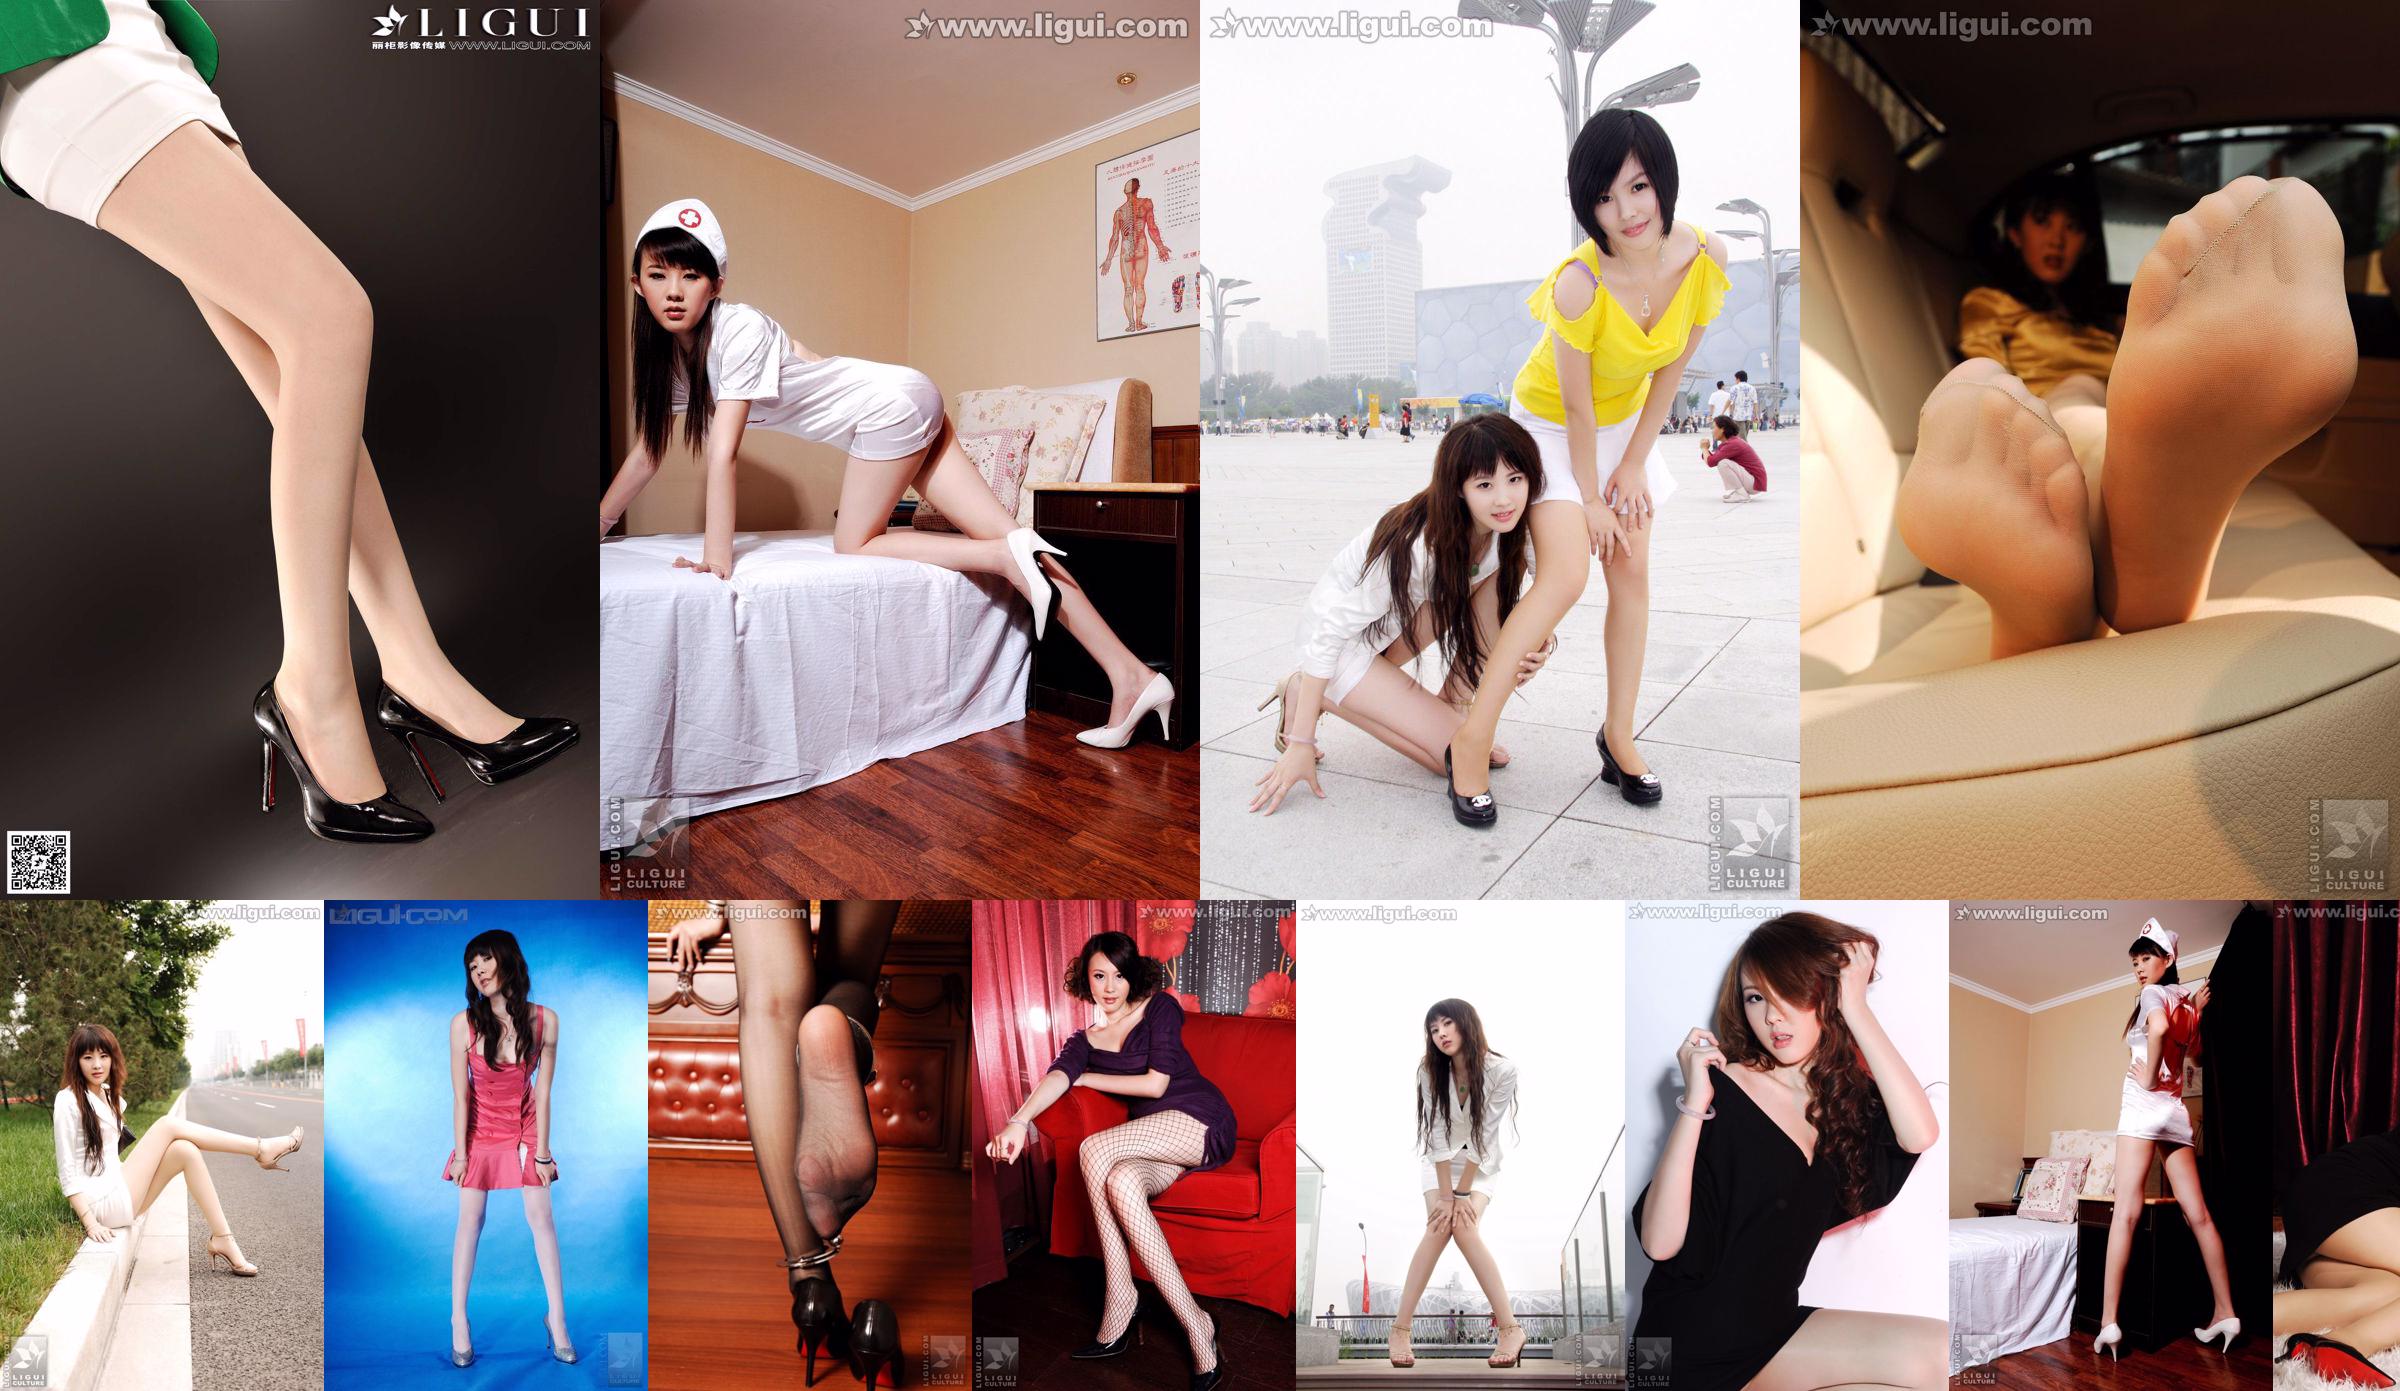 Model Feifei "Brows Trapped in Luxury Club" [丽柜美束LiGui] Photo stockings with jade feet No.b69247 Page 1